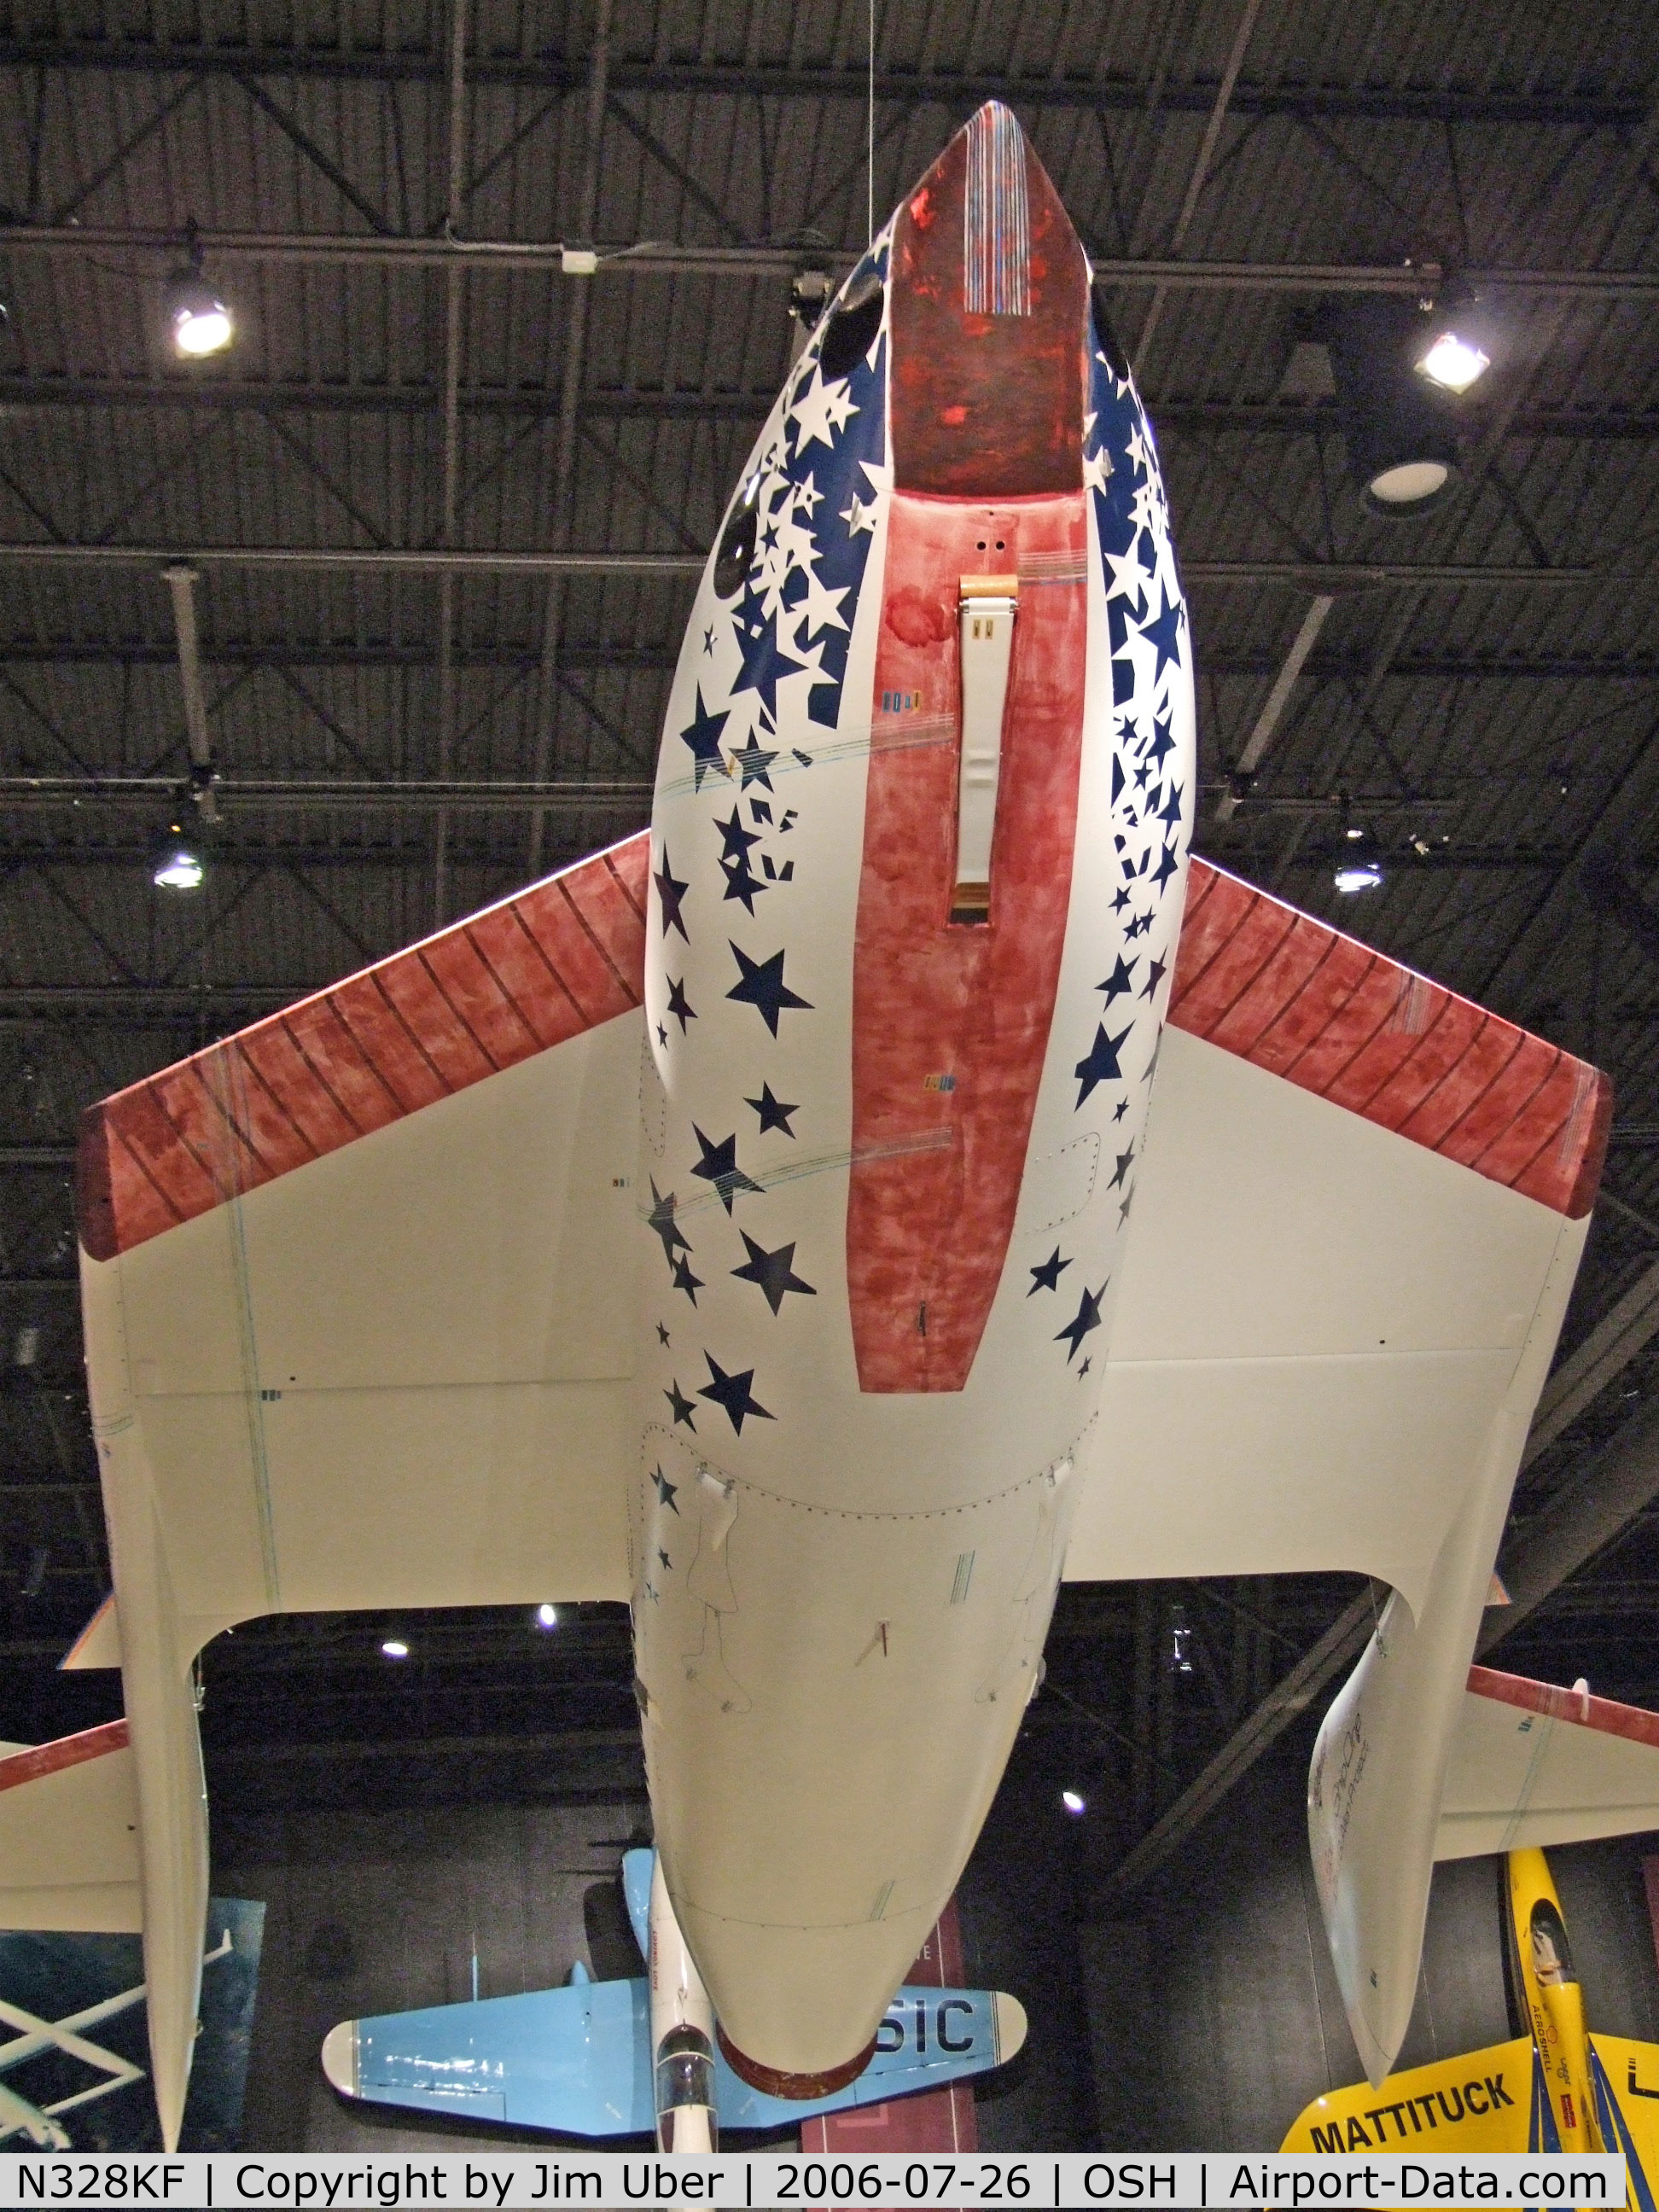 N328KF, 2003 Scaled Composites 316 C/N 001, Space Ship 1 (replica) unveiled at Airventure